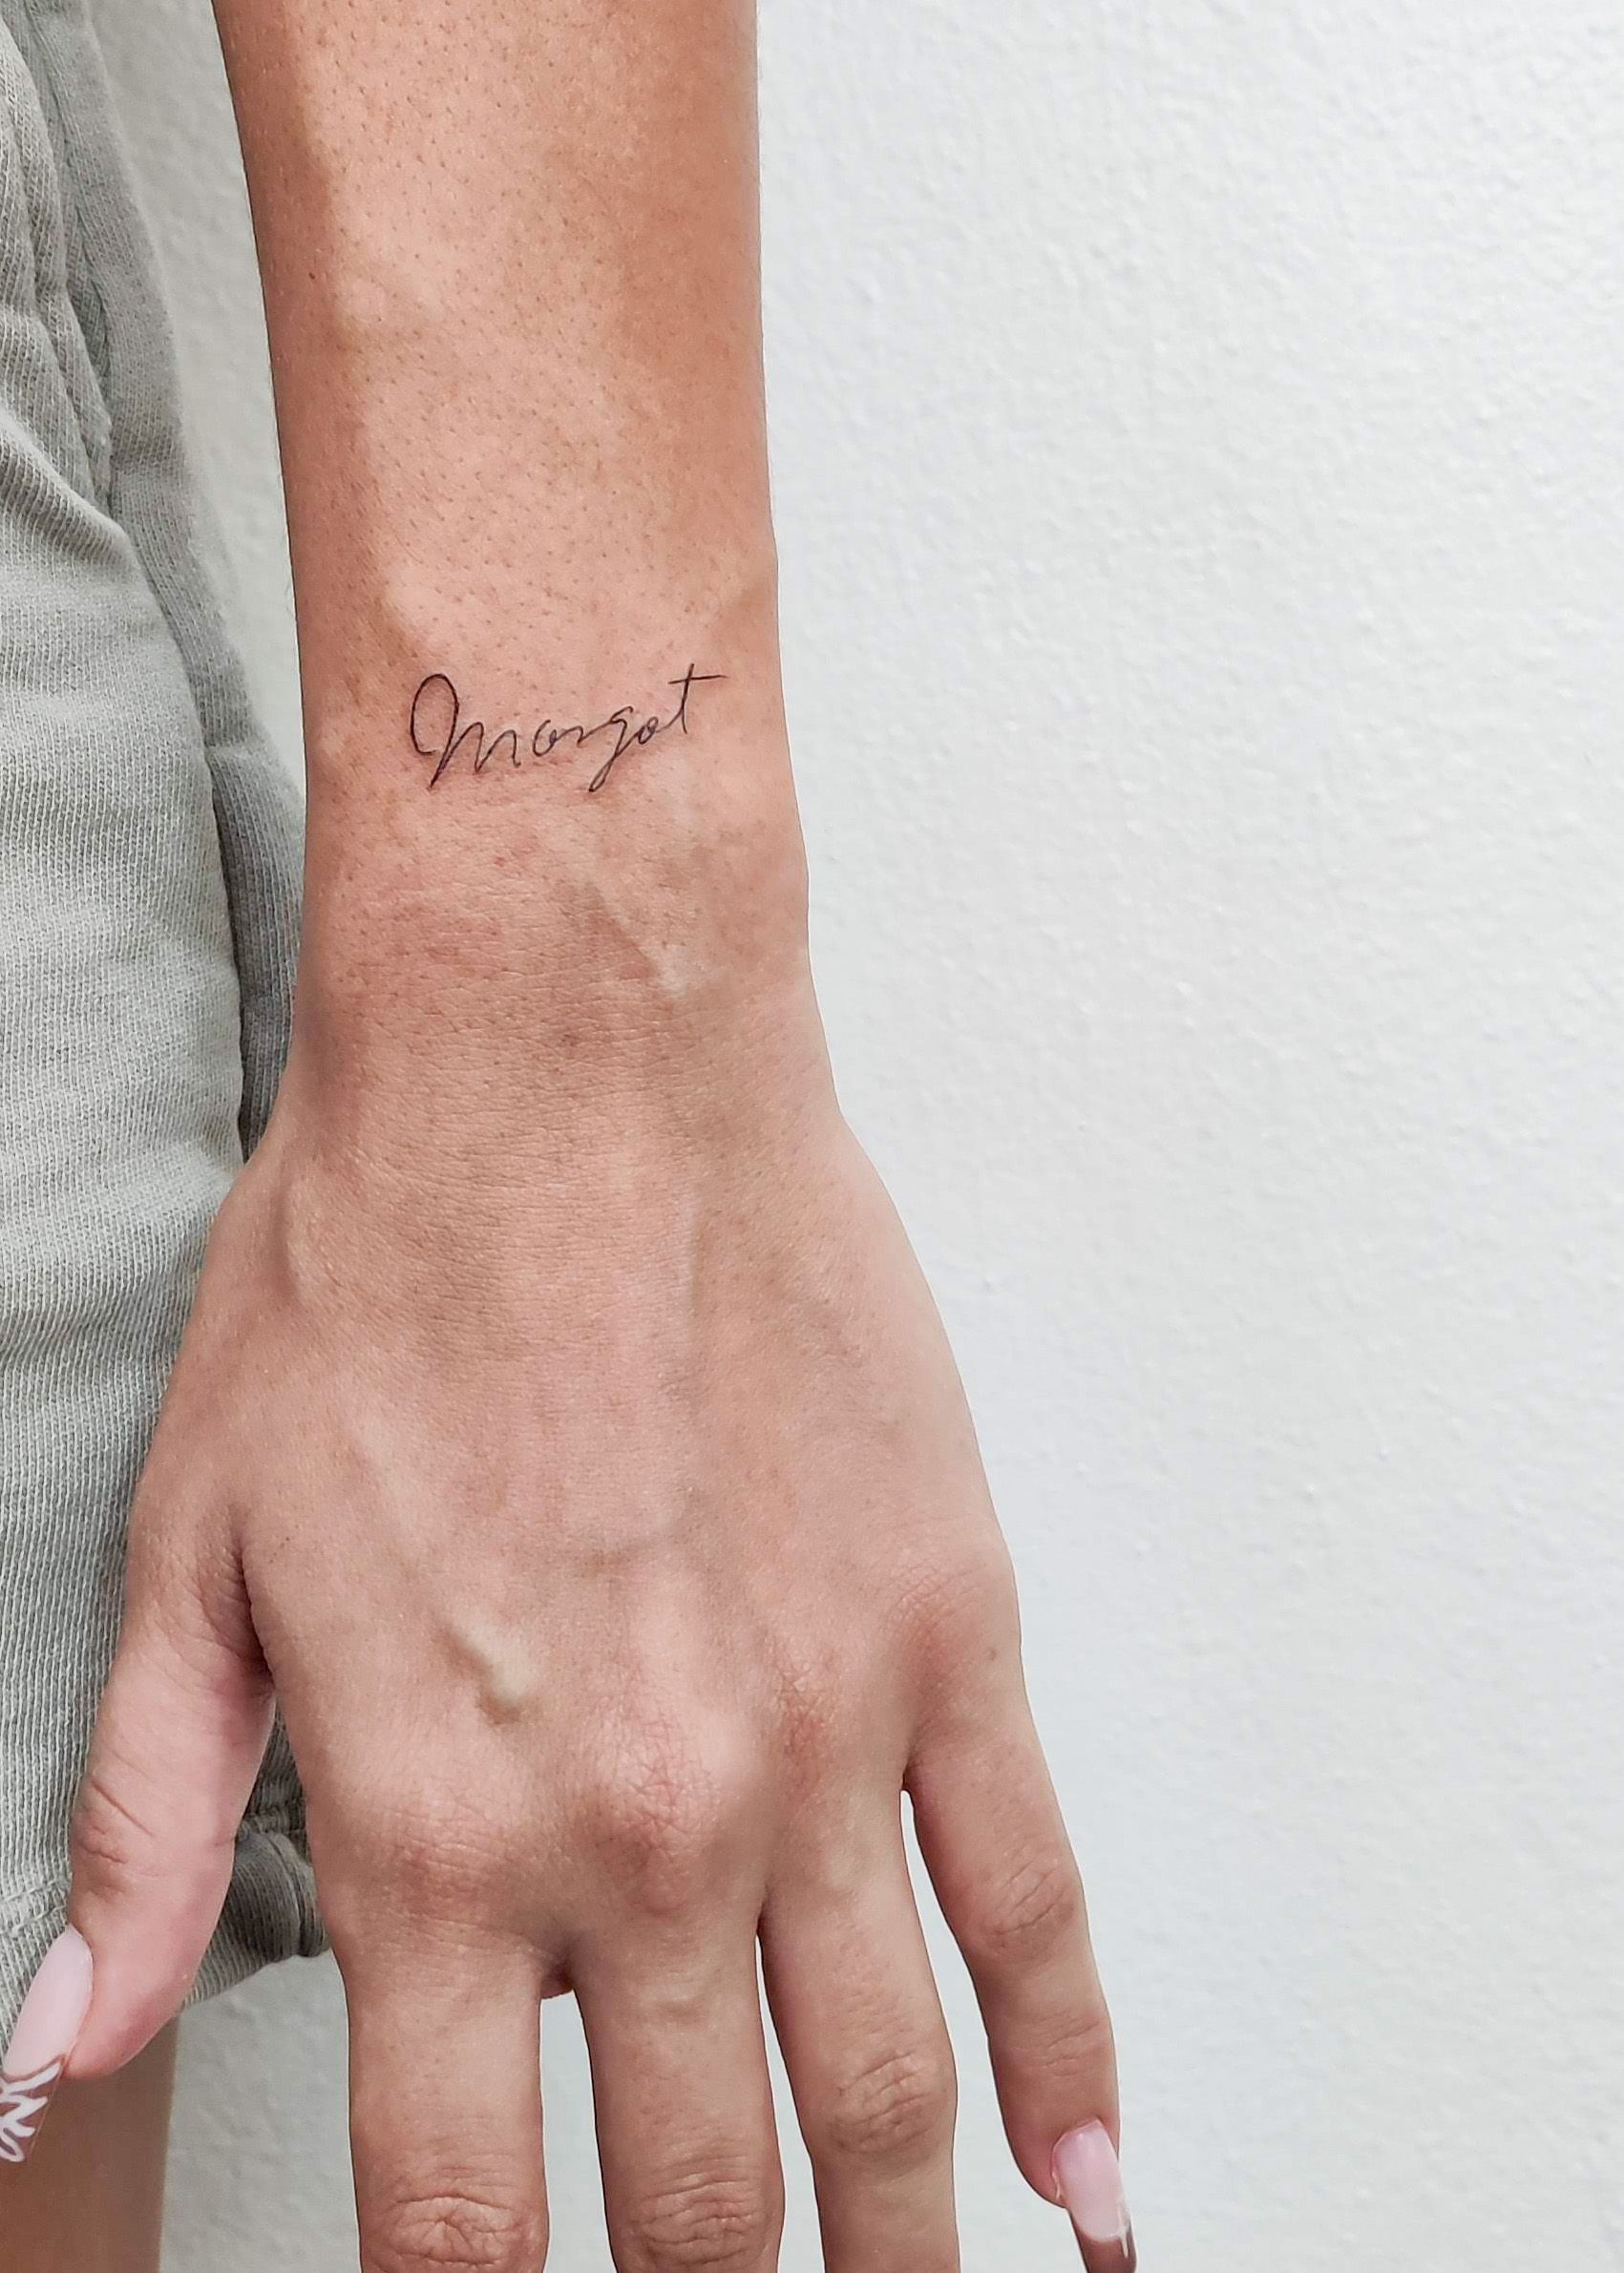 12 Tattoos With Deeply Powerful Meanings